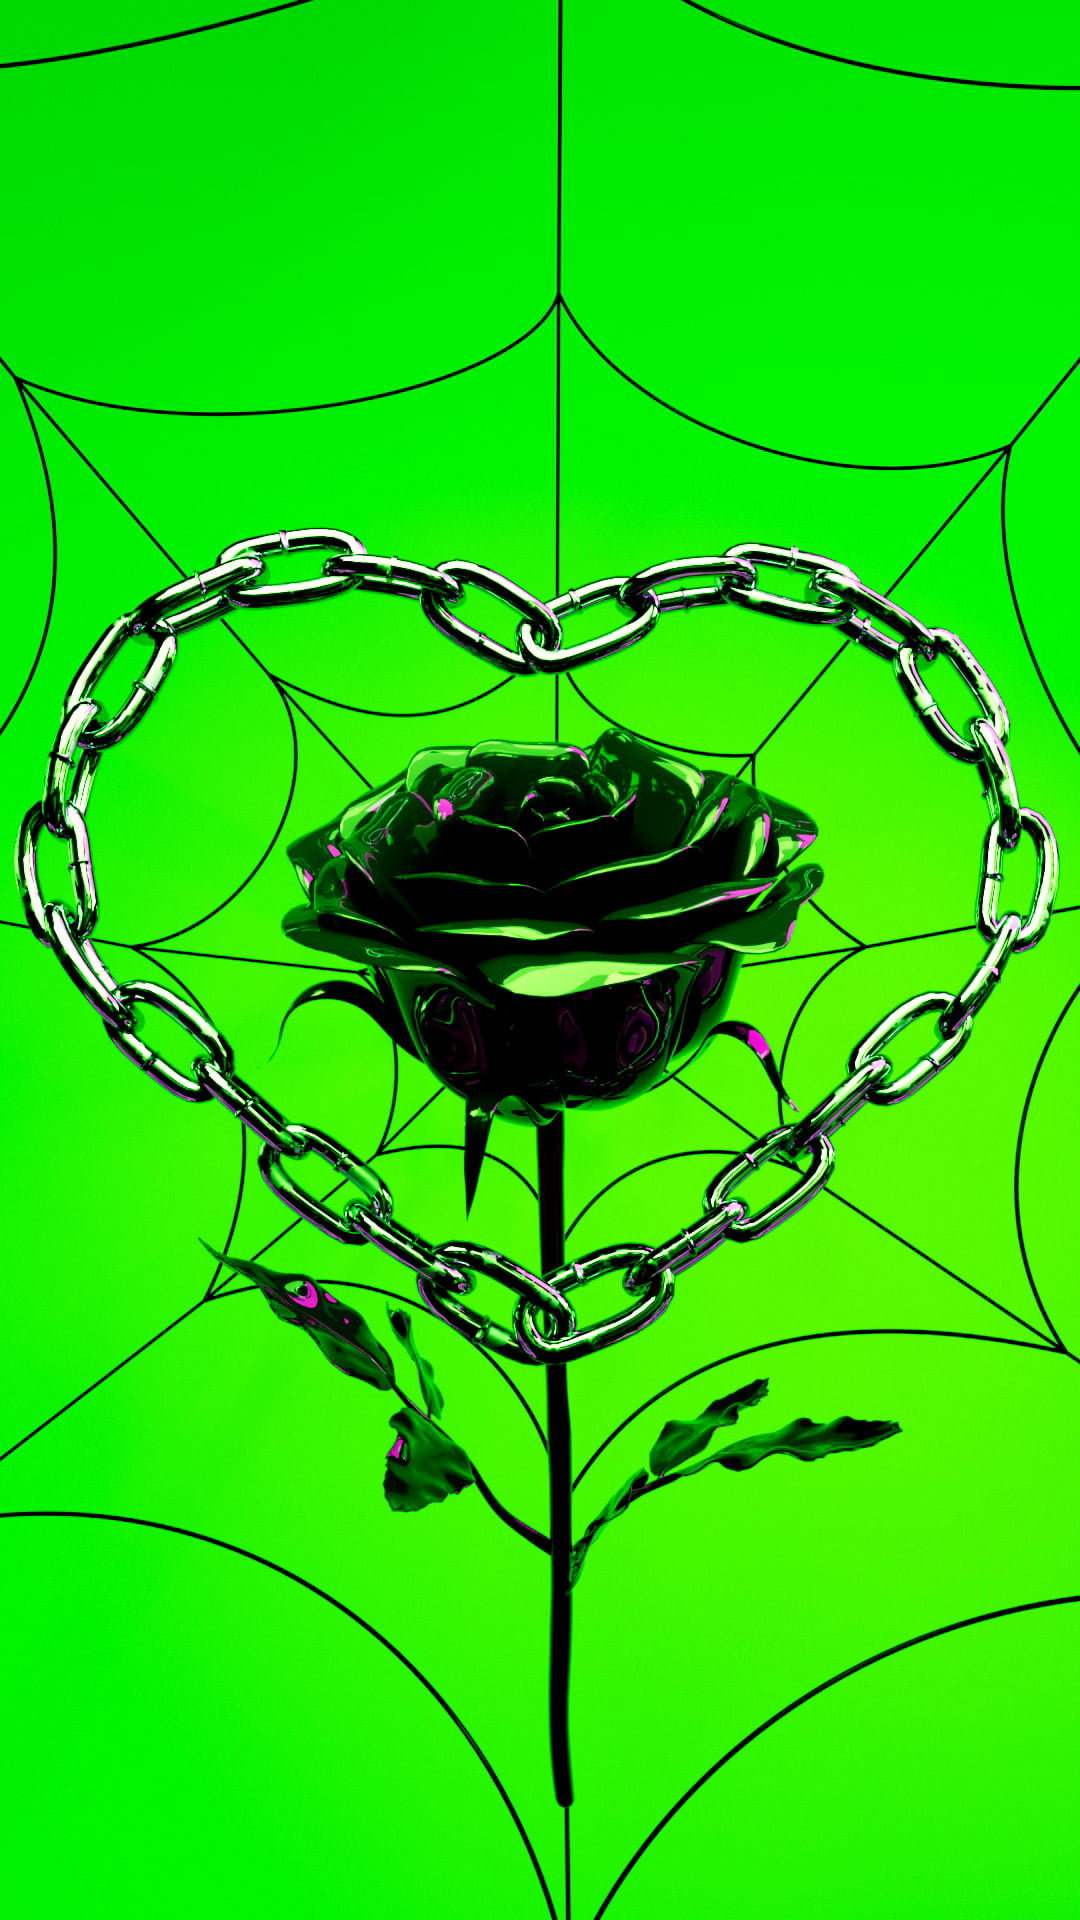 Neon Green with black spiderweb and black rose framed by silver heart shaped chain Wallpaper 03